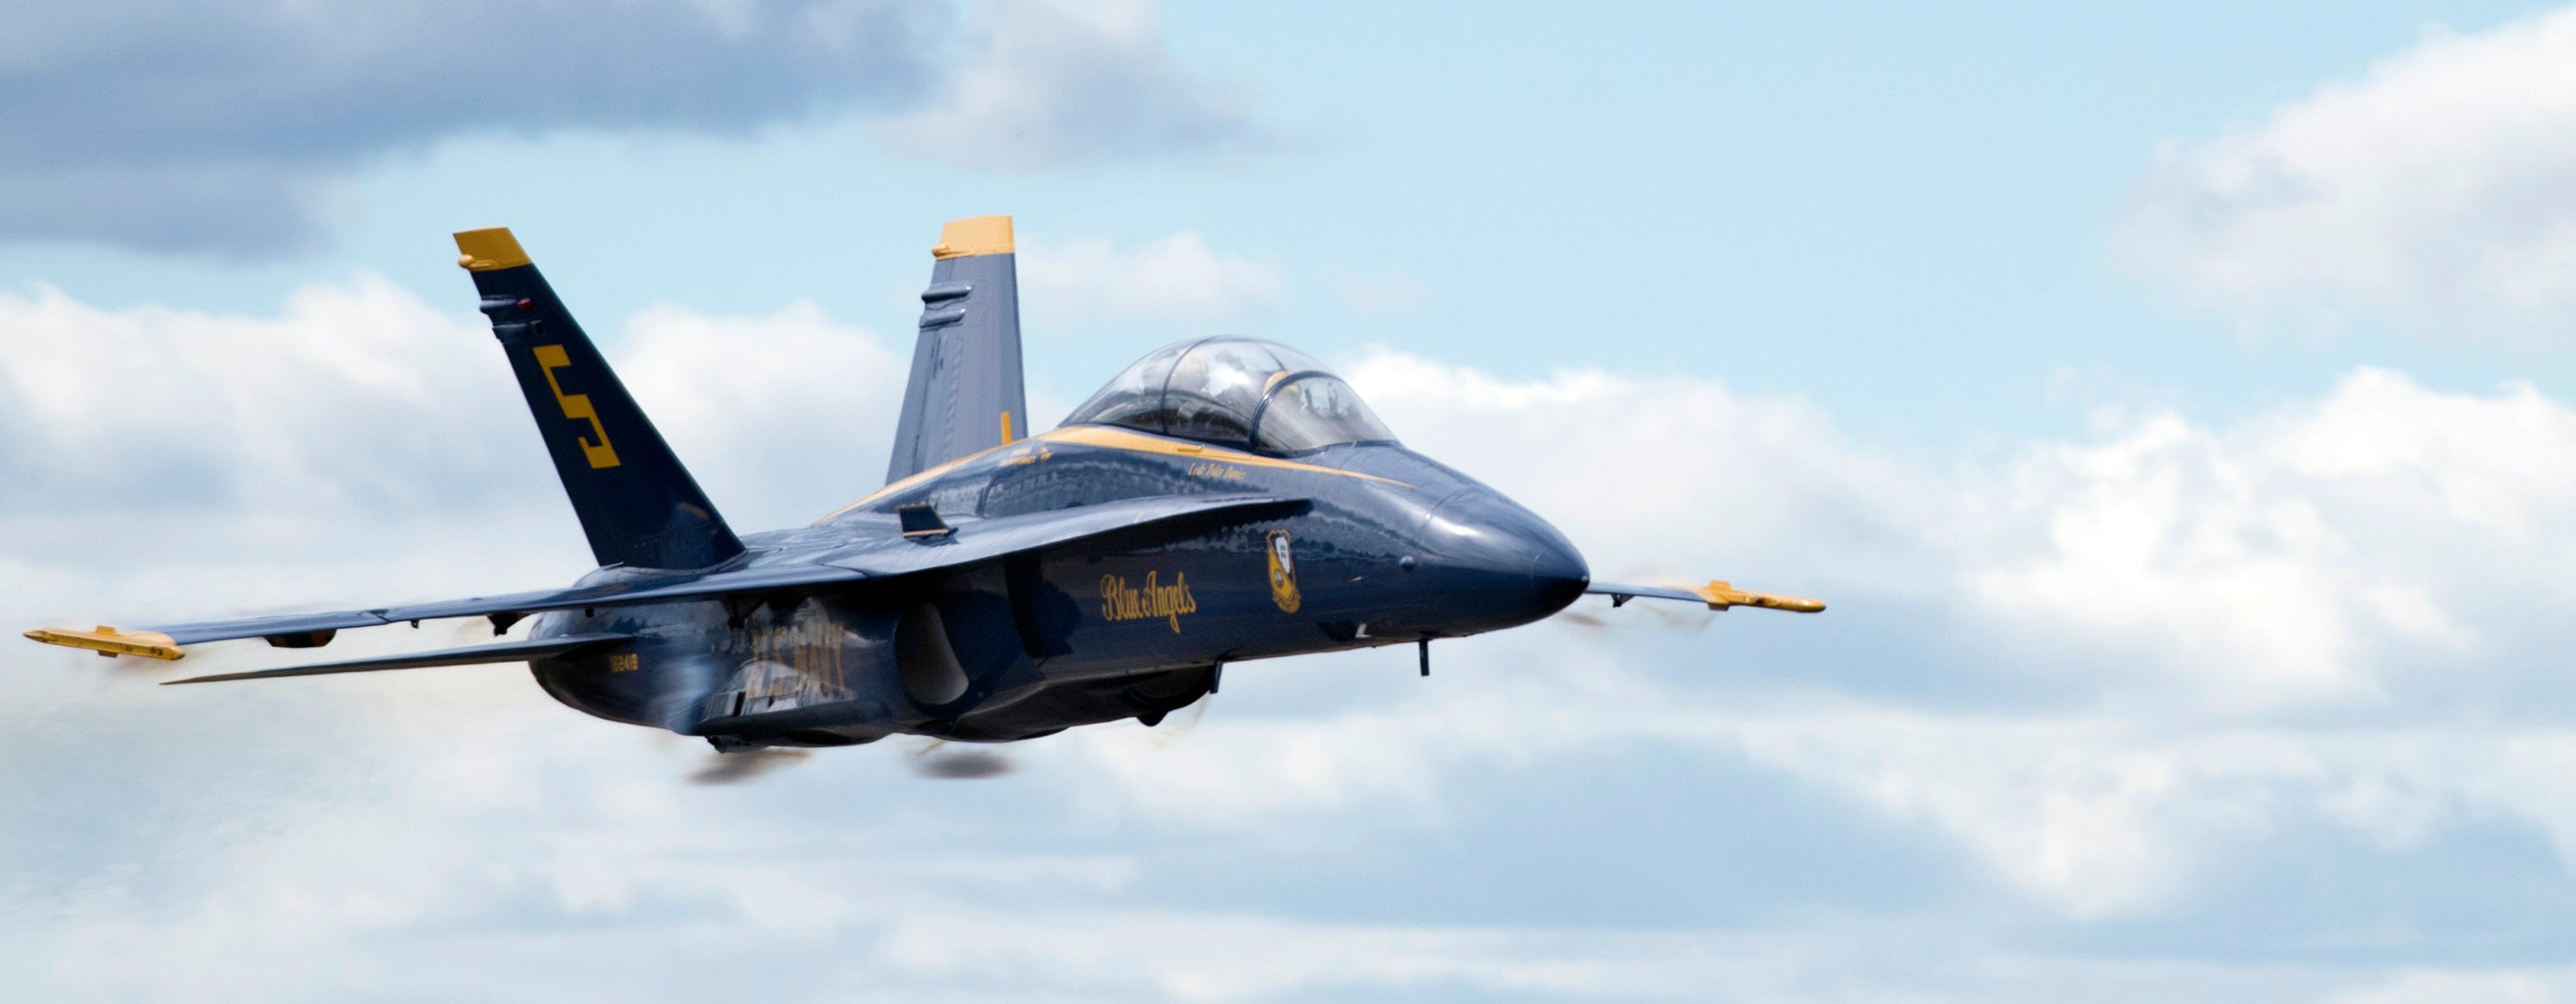 Blue Angels Air Show 2022 schedule at NAS Pensacola